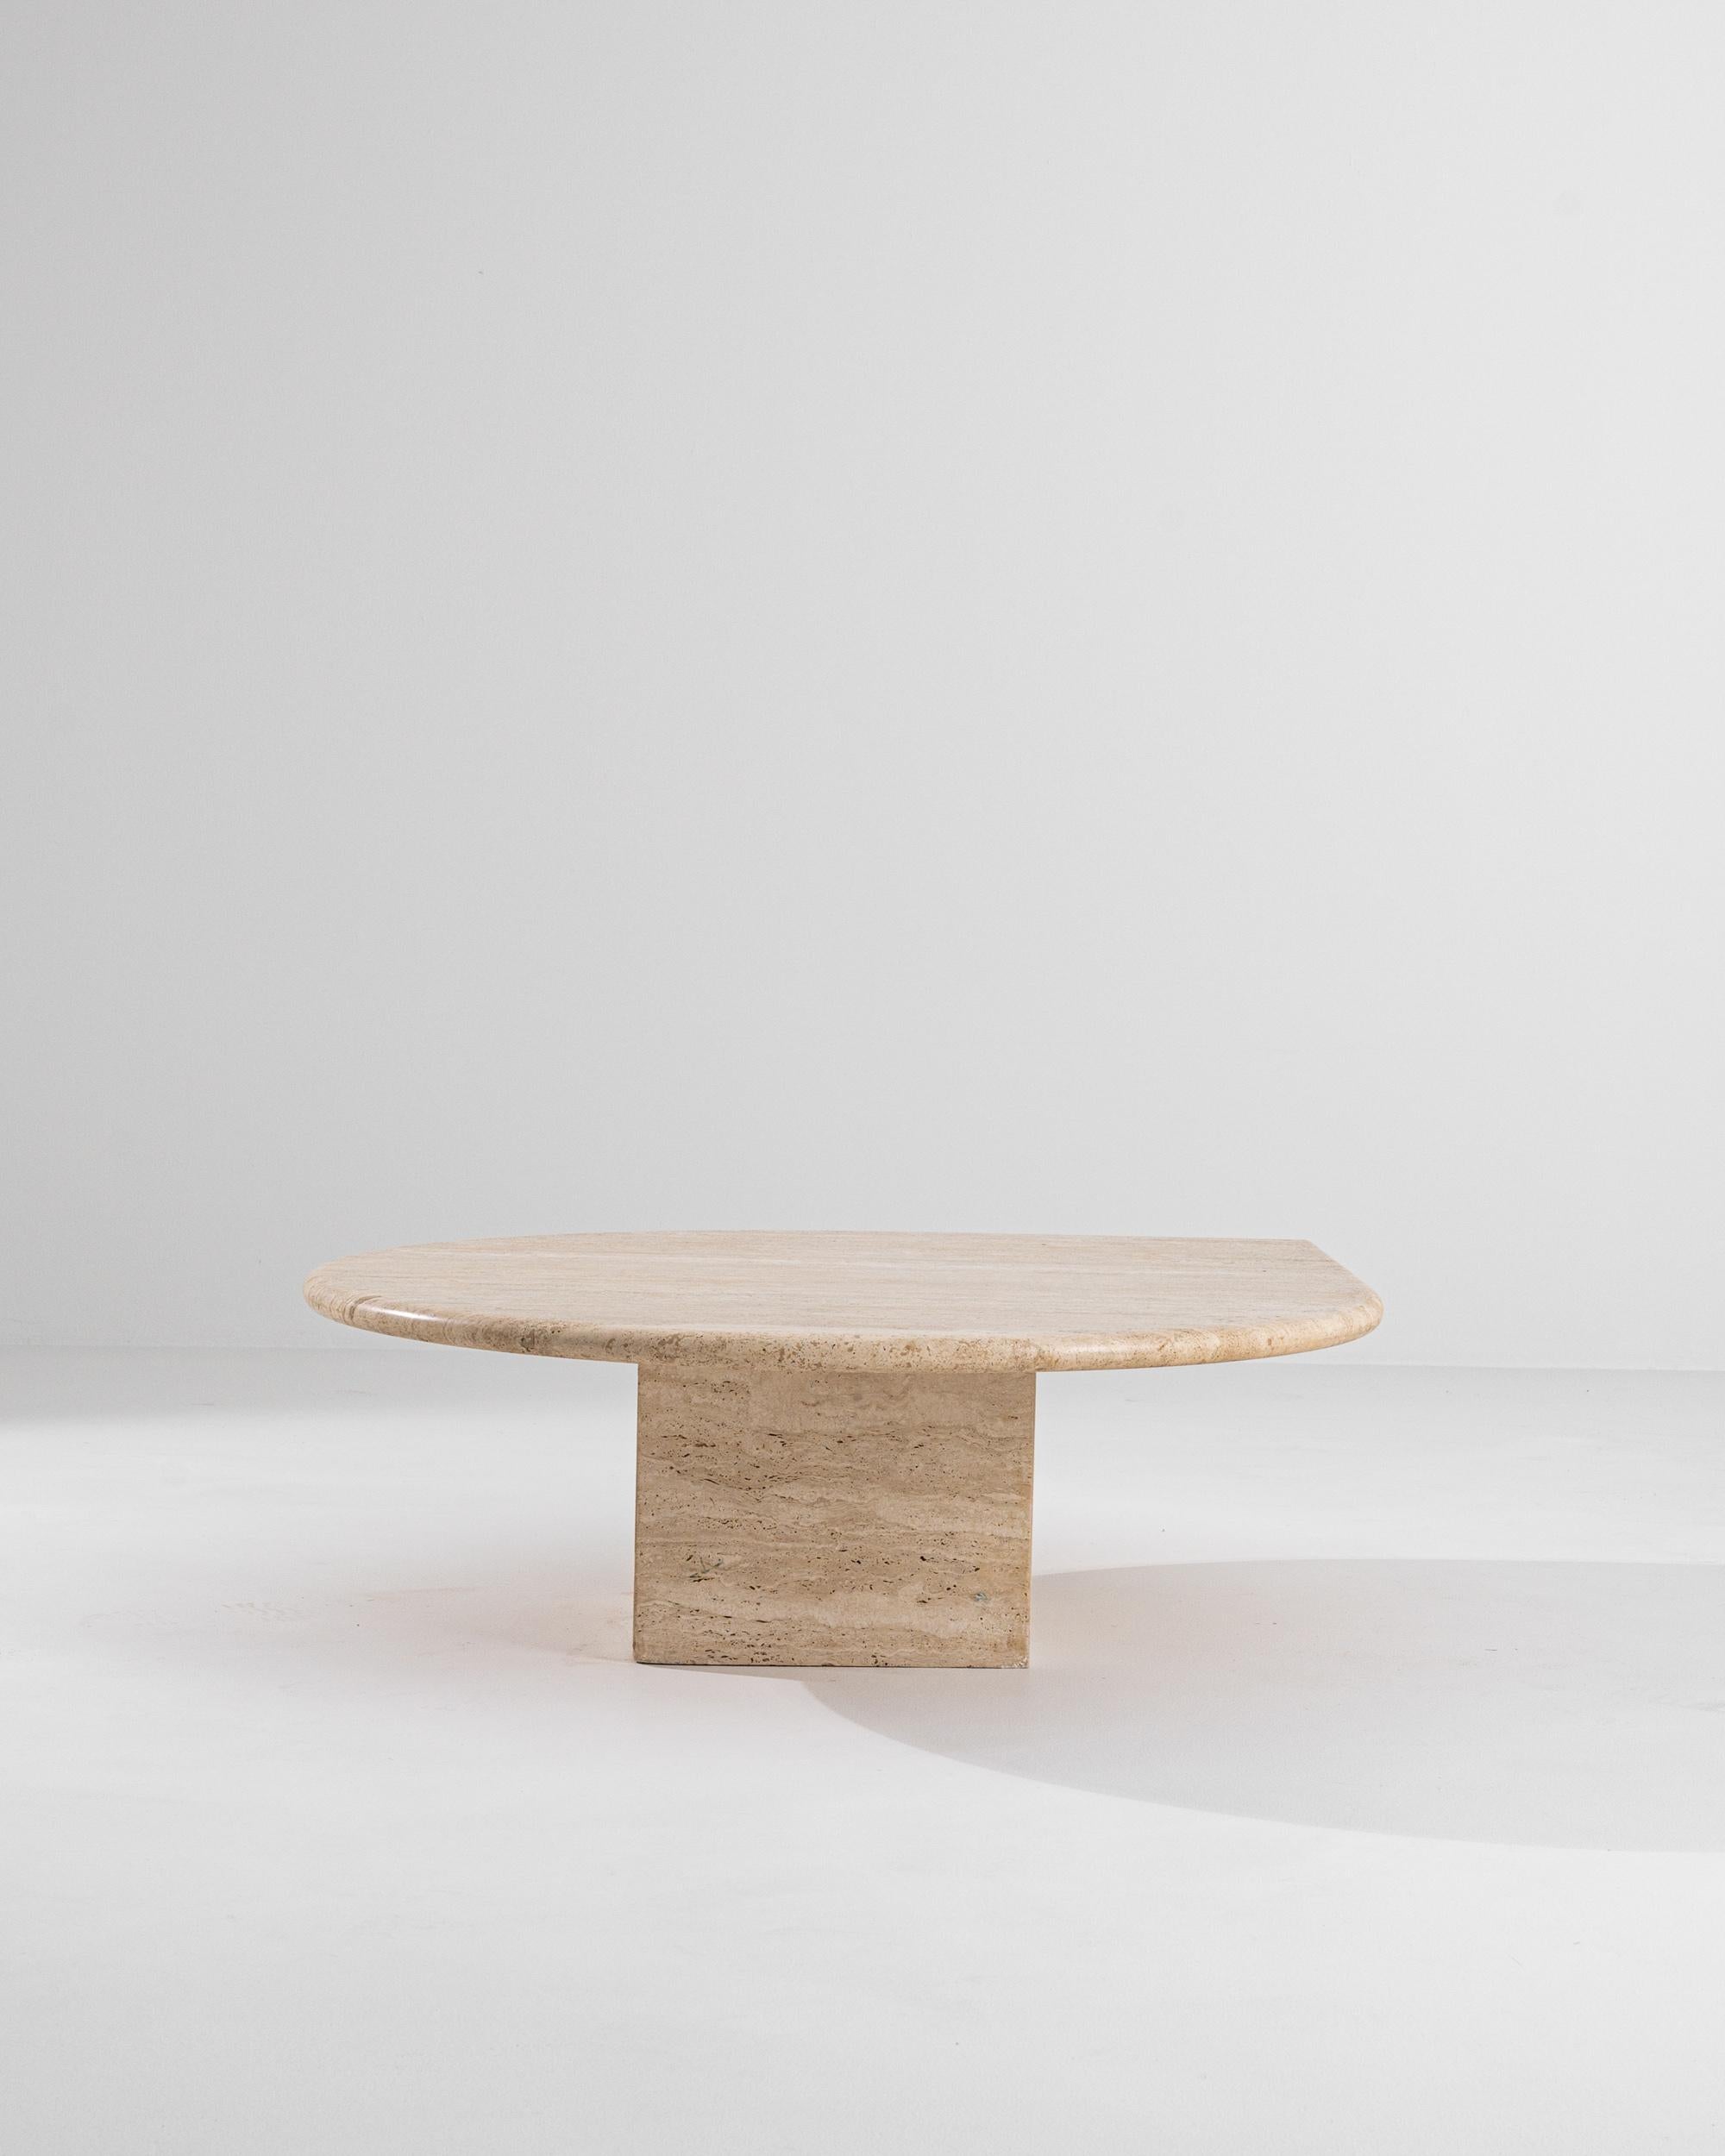 The formal simplicity and rich materiality of this travertine marble coffee table create an impression of minimalist elegance. Made in Italy in the 1970s, a rounded top comes to a single point, resting gently on a low stone pedestal. The warm